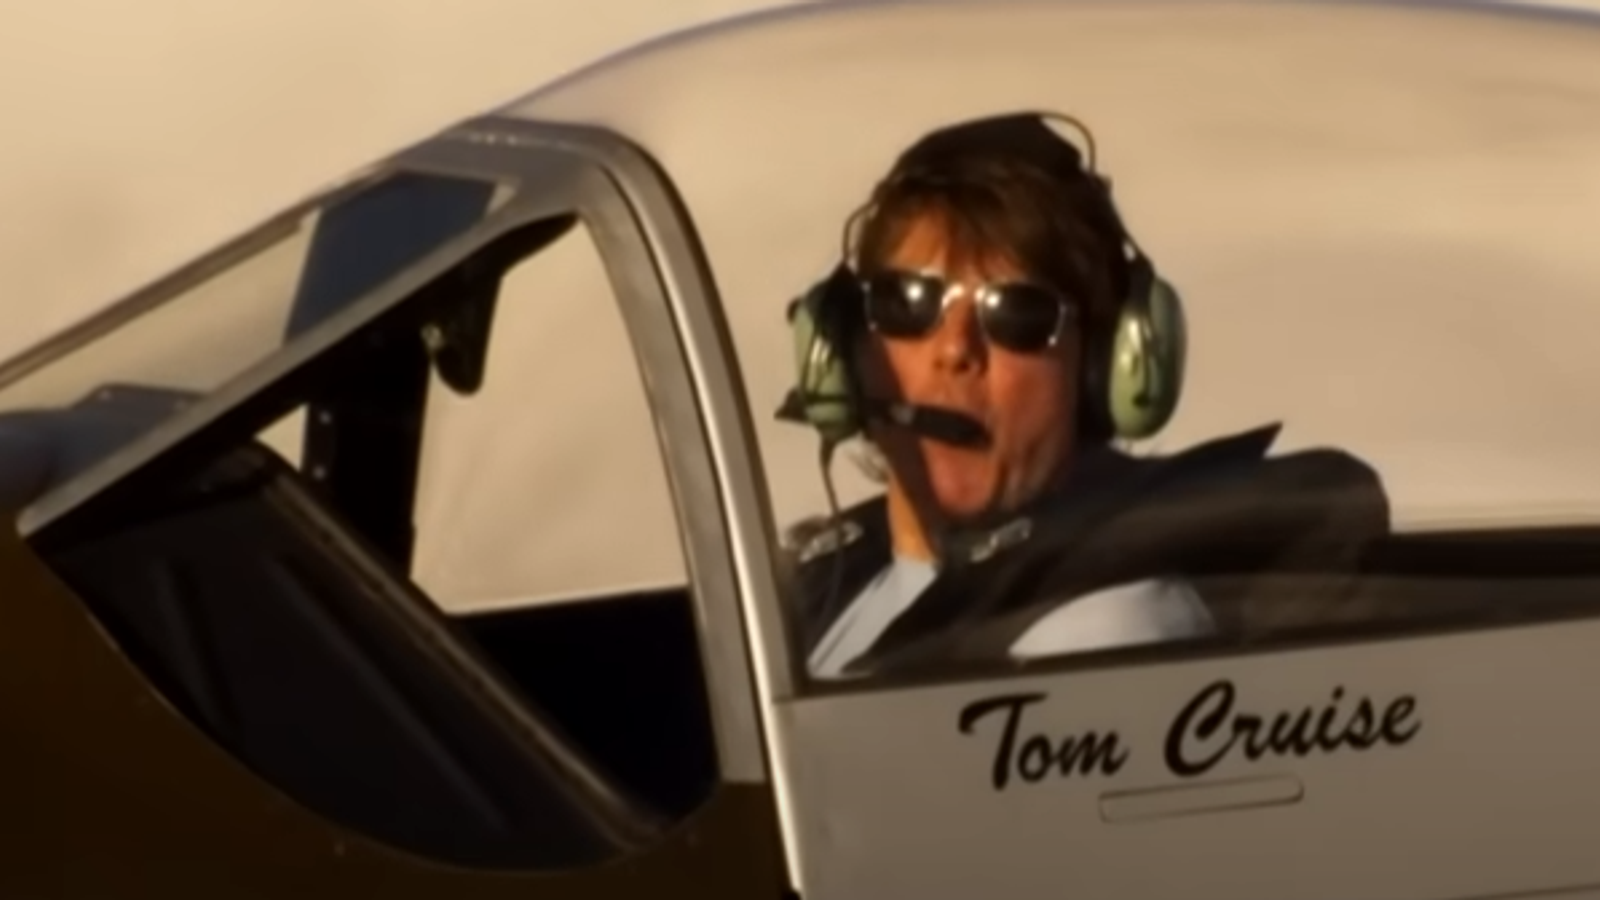 Tom Cruise's coronation concert cameo almost identical to his MTV award acceptance video